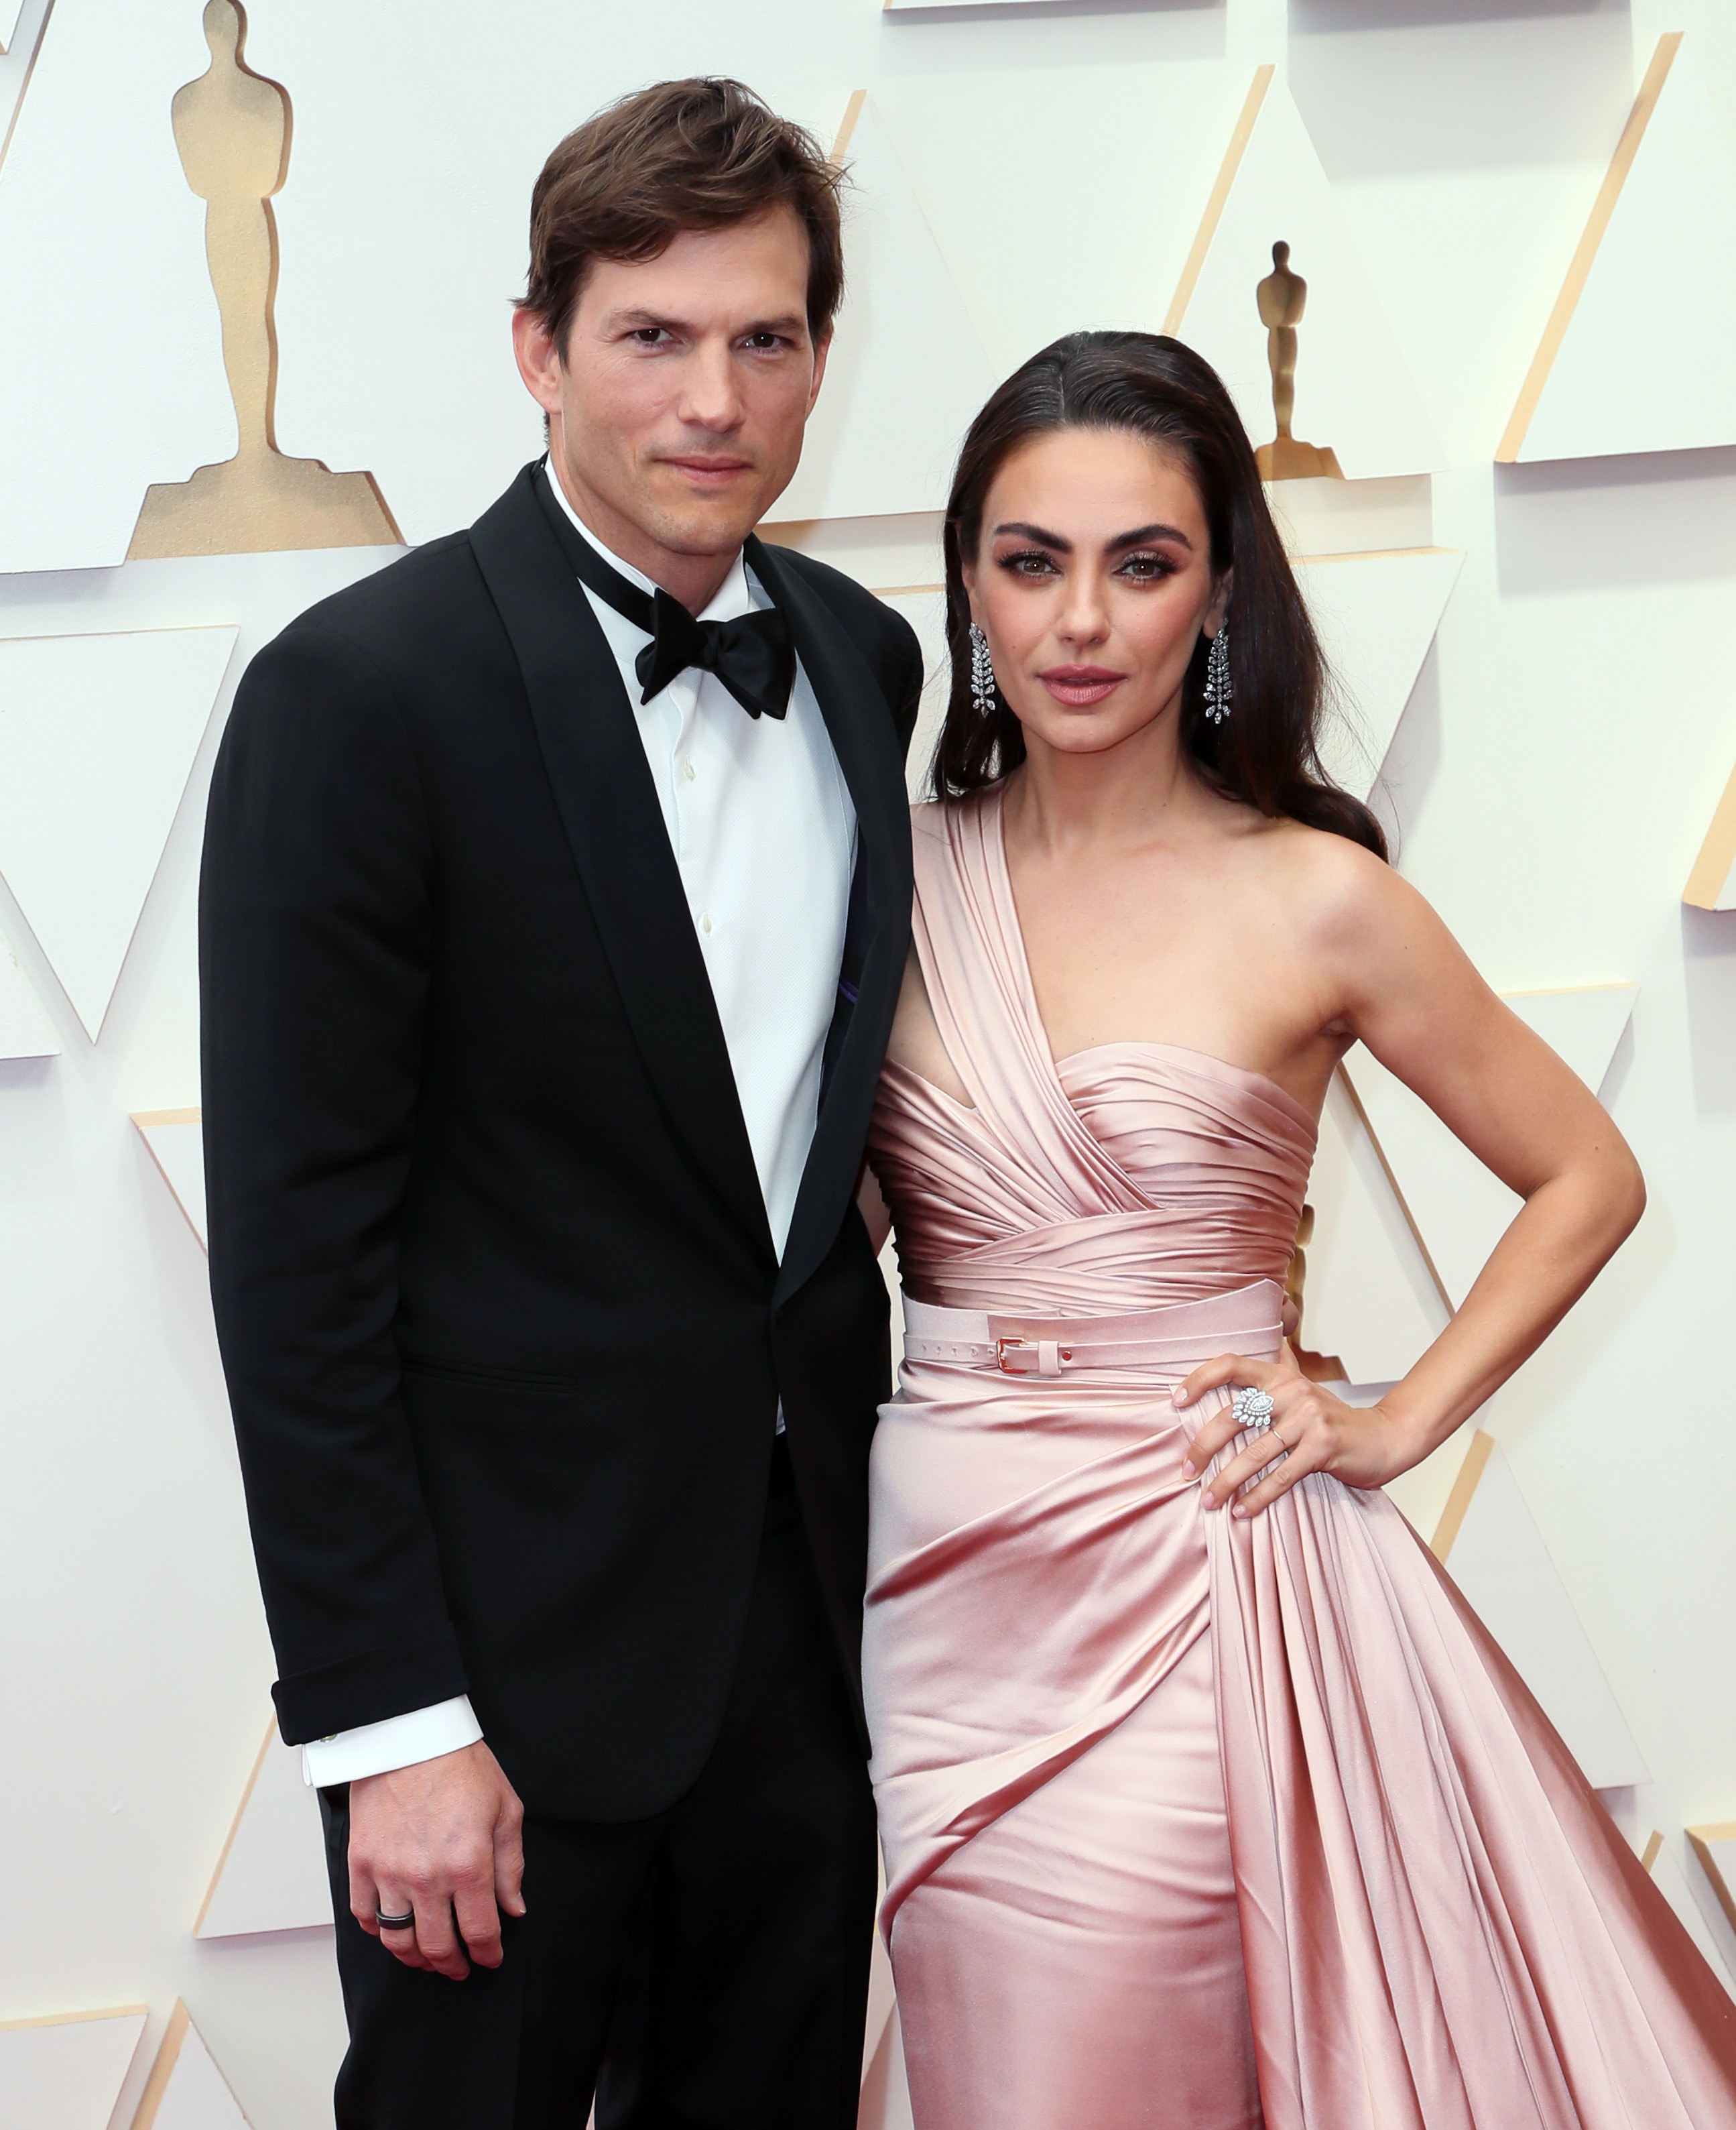 Ashton Kutcher and Mila Kunis arrive at the 94th Oscars ceremony on March 27, 2022